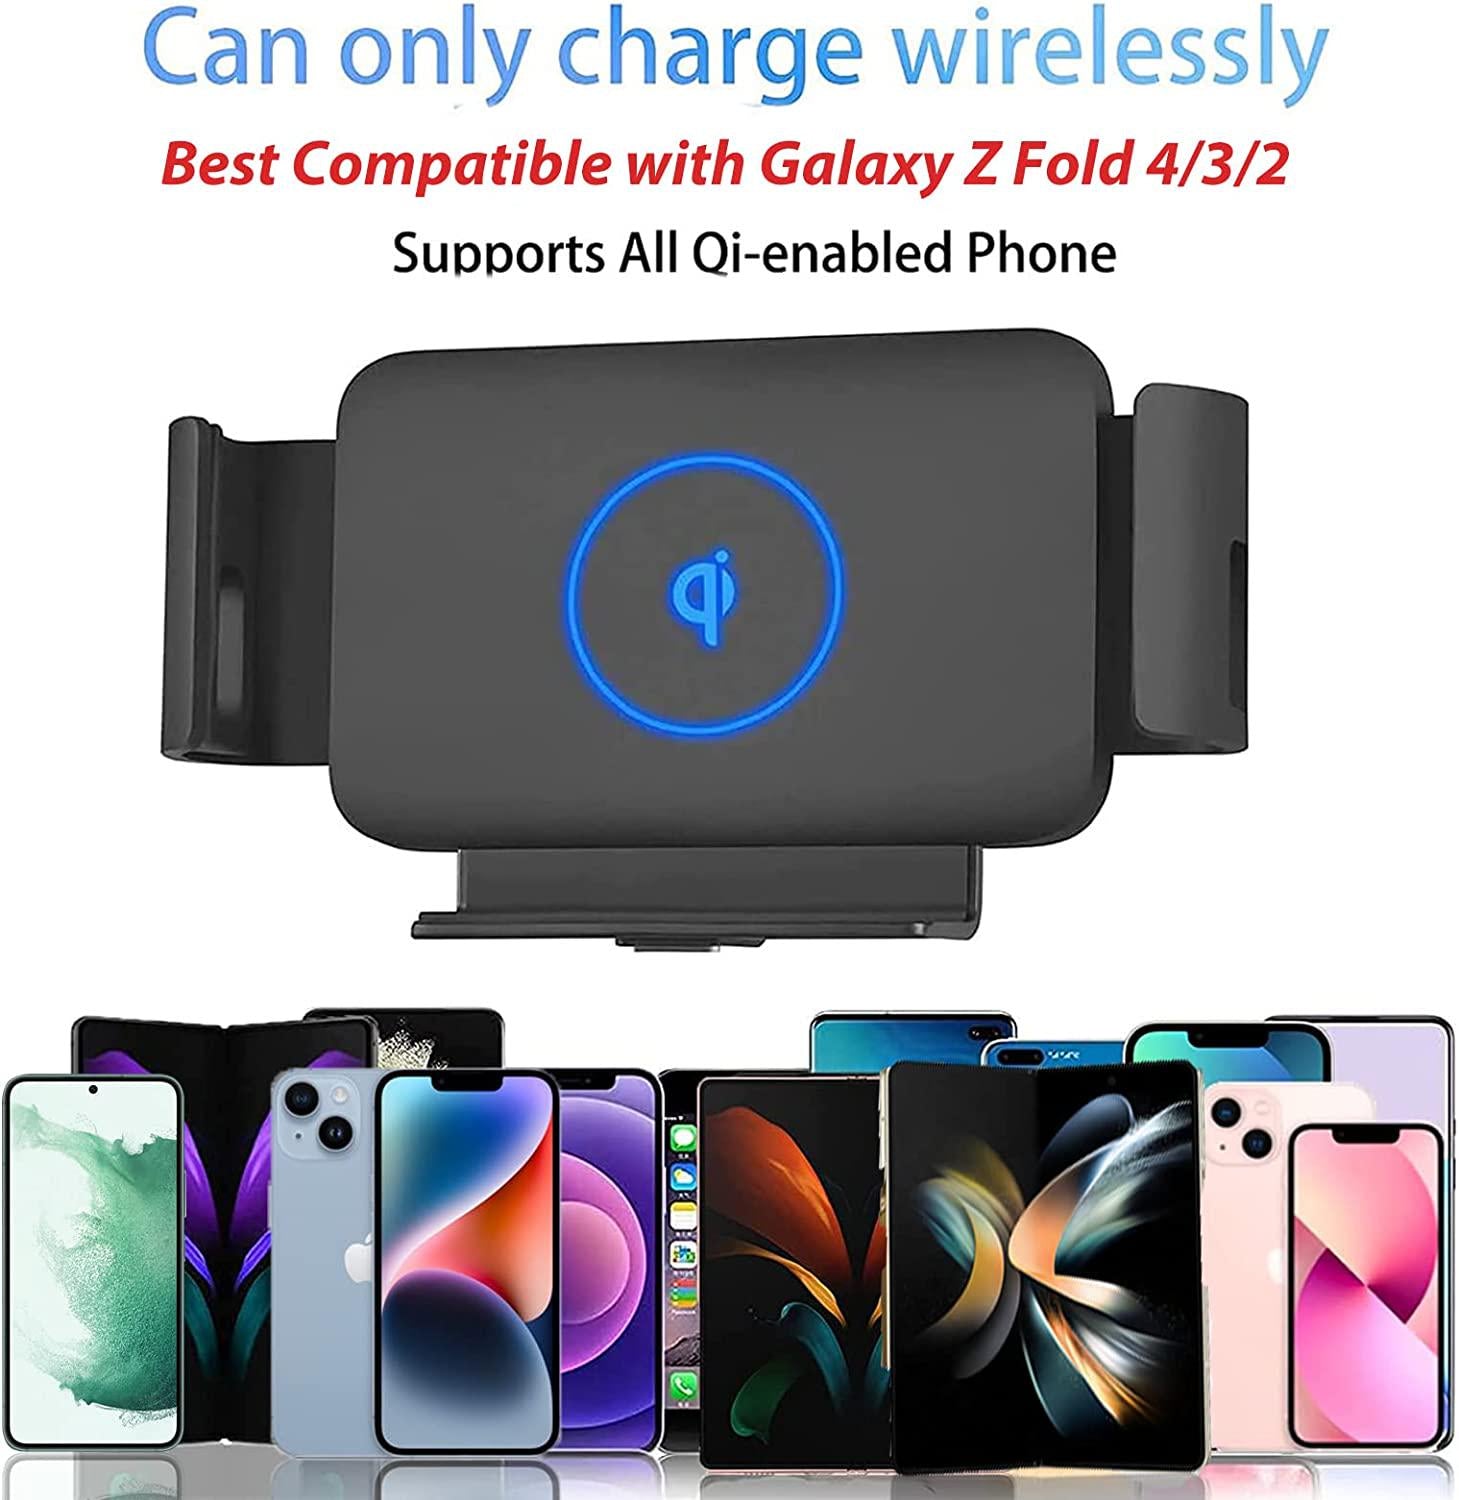 Lopnord, Lopnord Z Fold 4 Car Mount, Wireless Car Charger Mount Compatible with Samsung Galaxy Z Fold 4 3 2/S22 Ultra, Wireless Charger for Air Vent/Dashboard Car Phone Holder for iPhone 14 13 Pro Max Plus